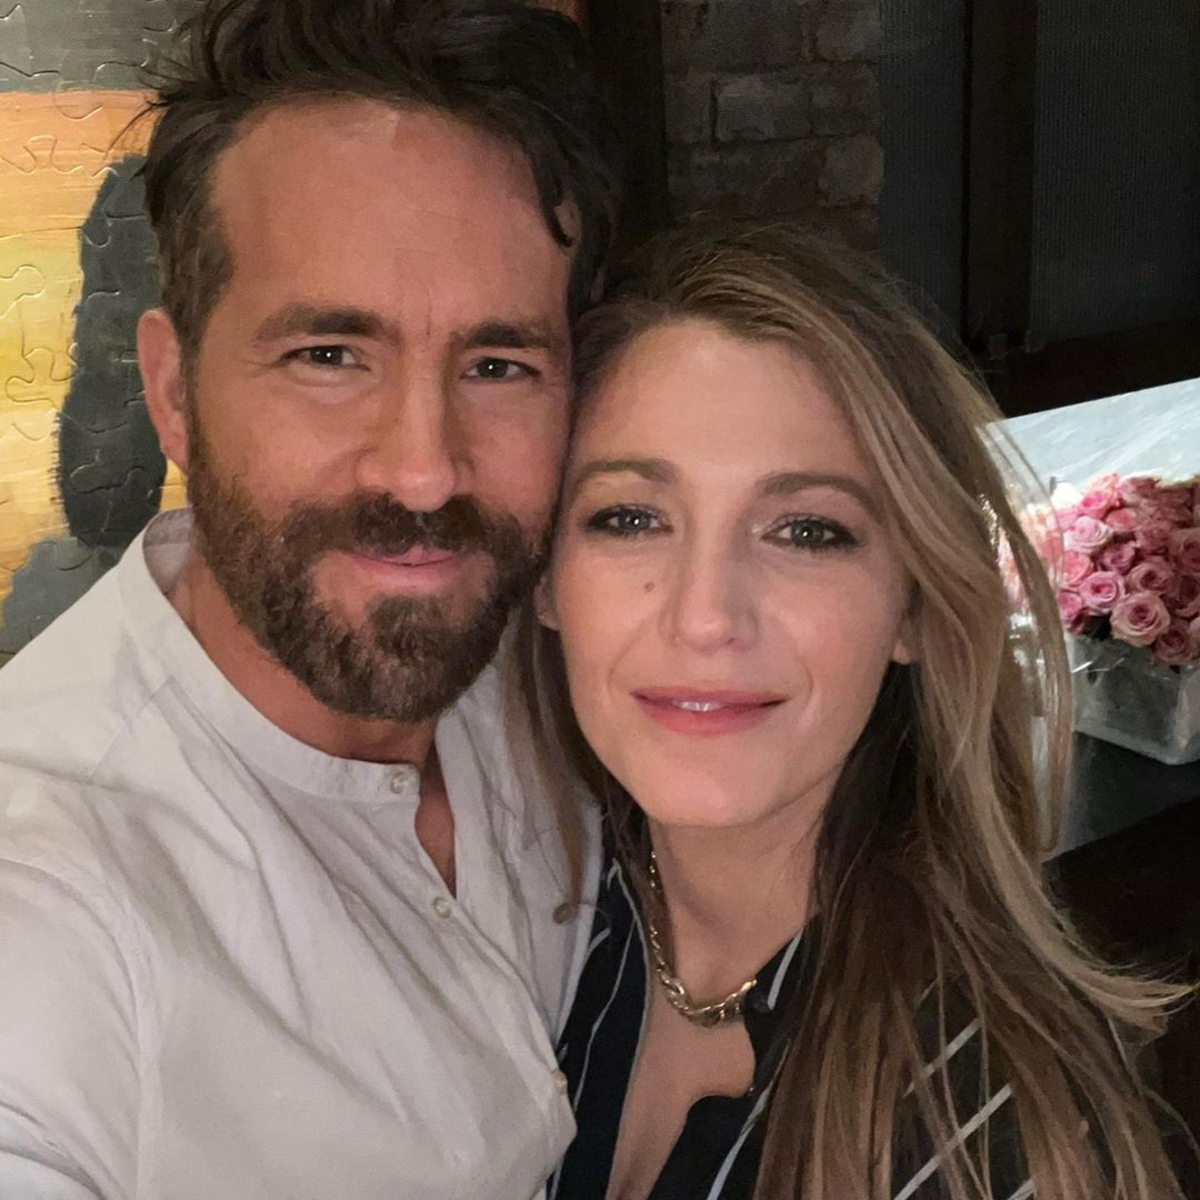 You Know You'll Love Ryan Reynolds' Birthday Tribute to Blake Lively